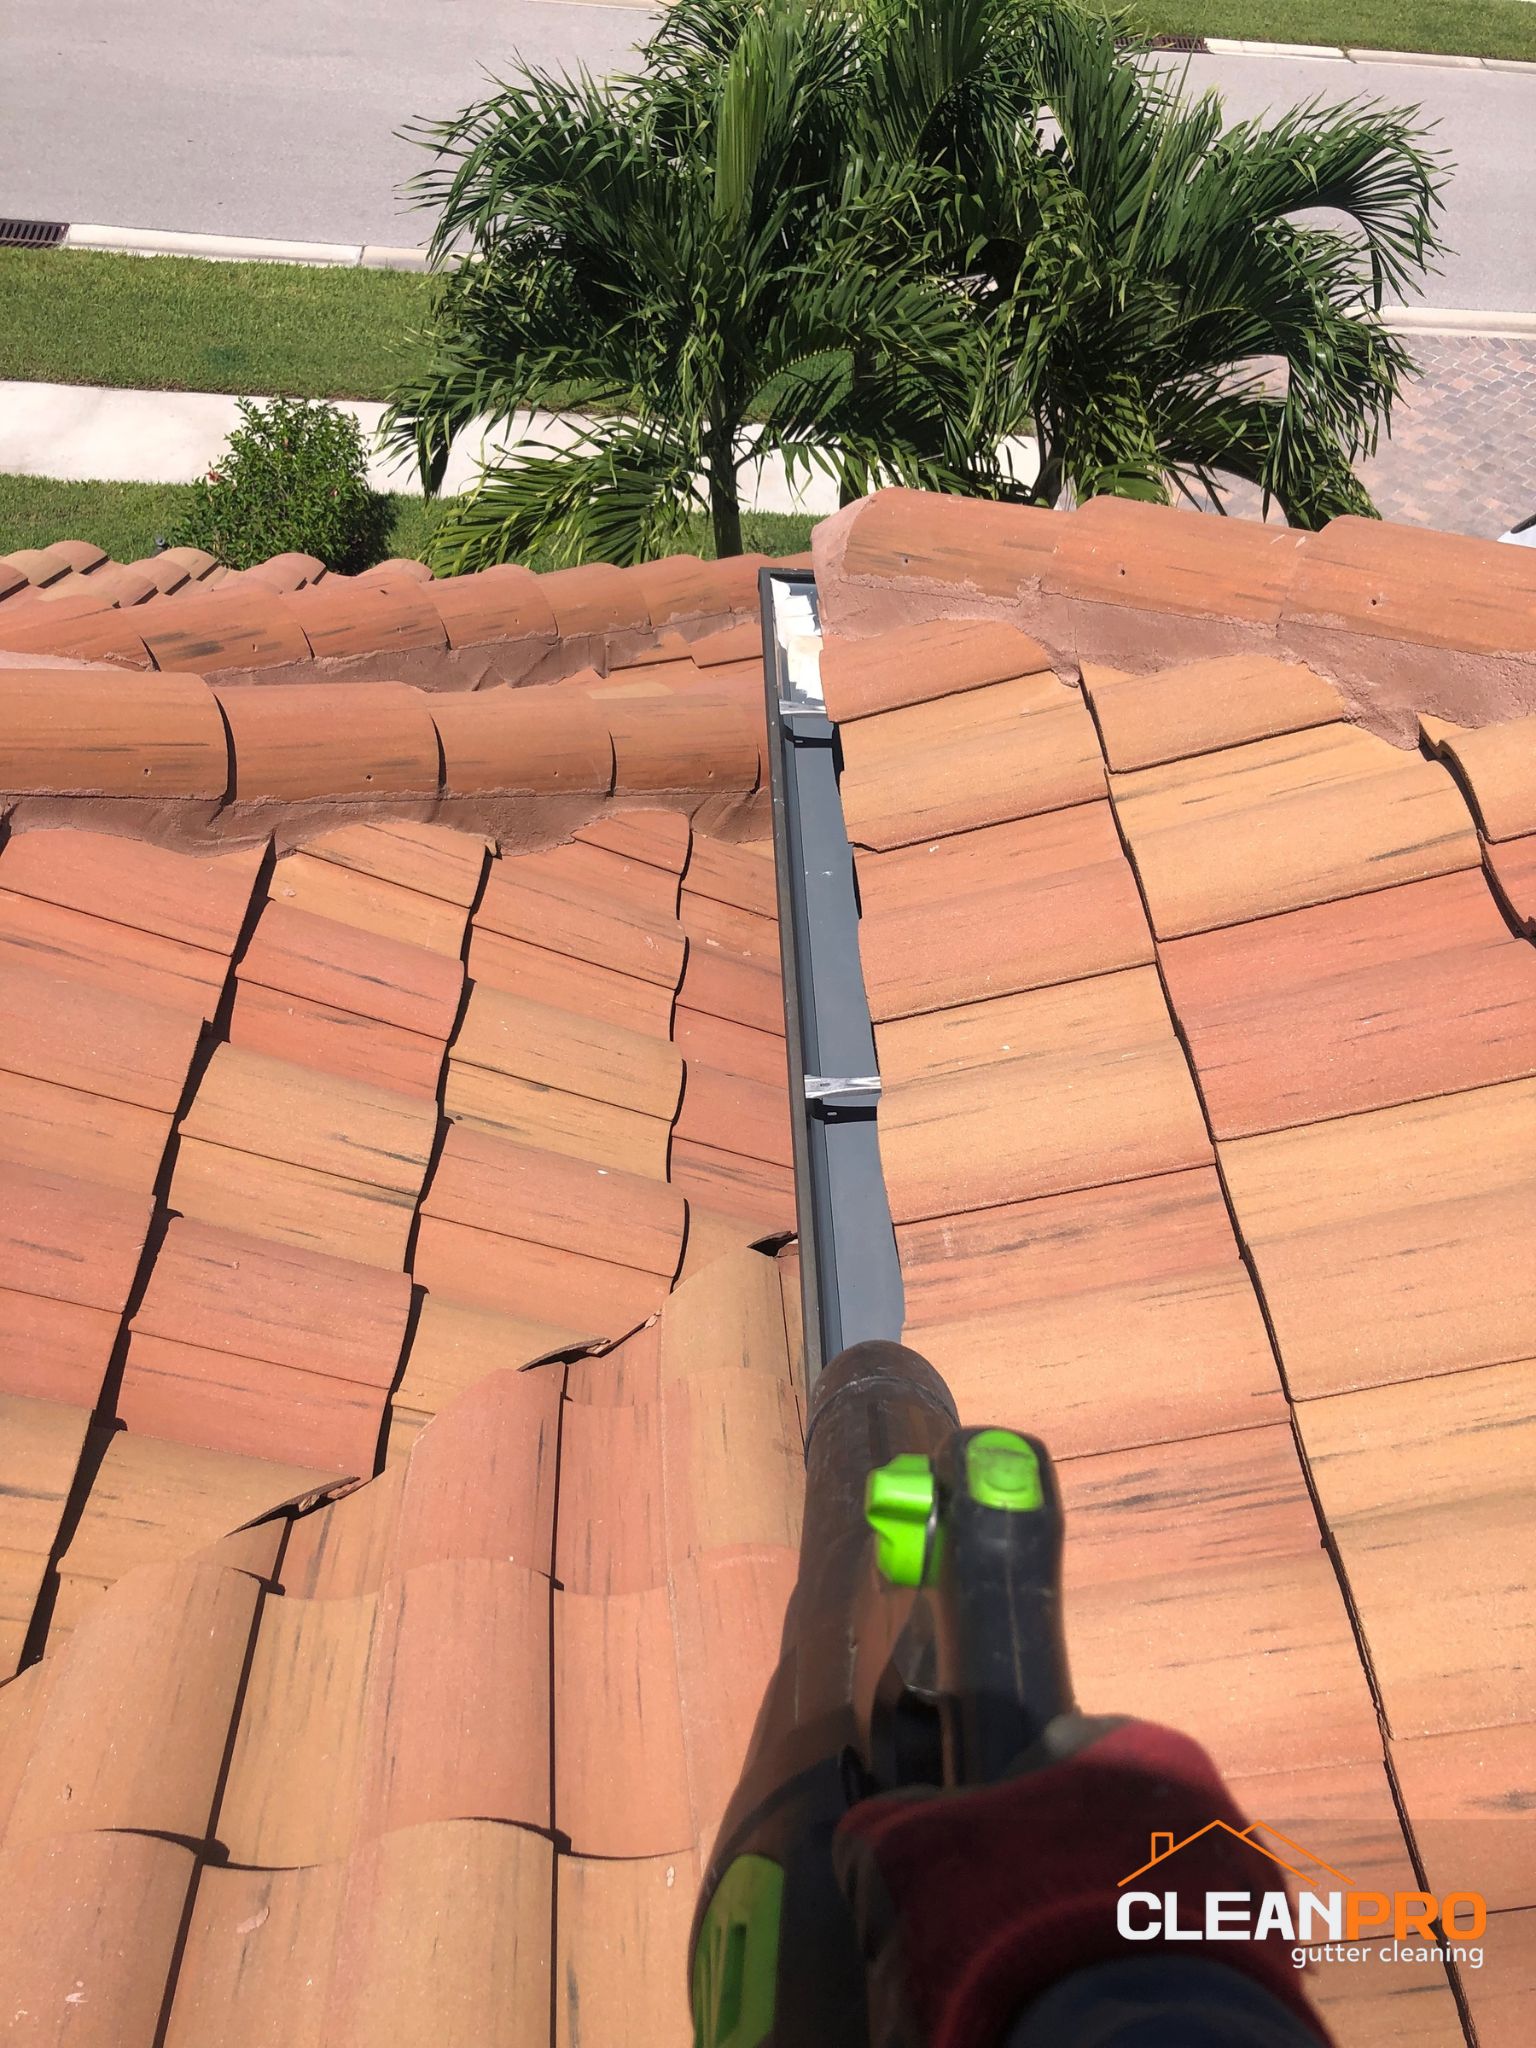 Gutter Cleaning in Durham for Cecilia Home